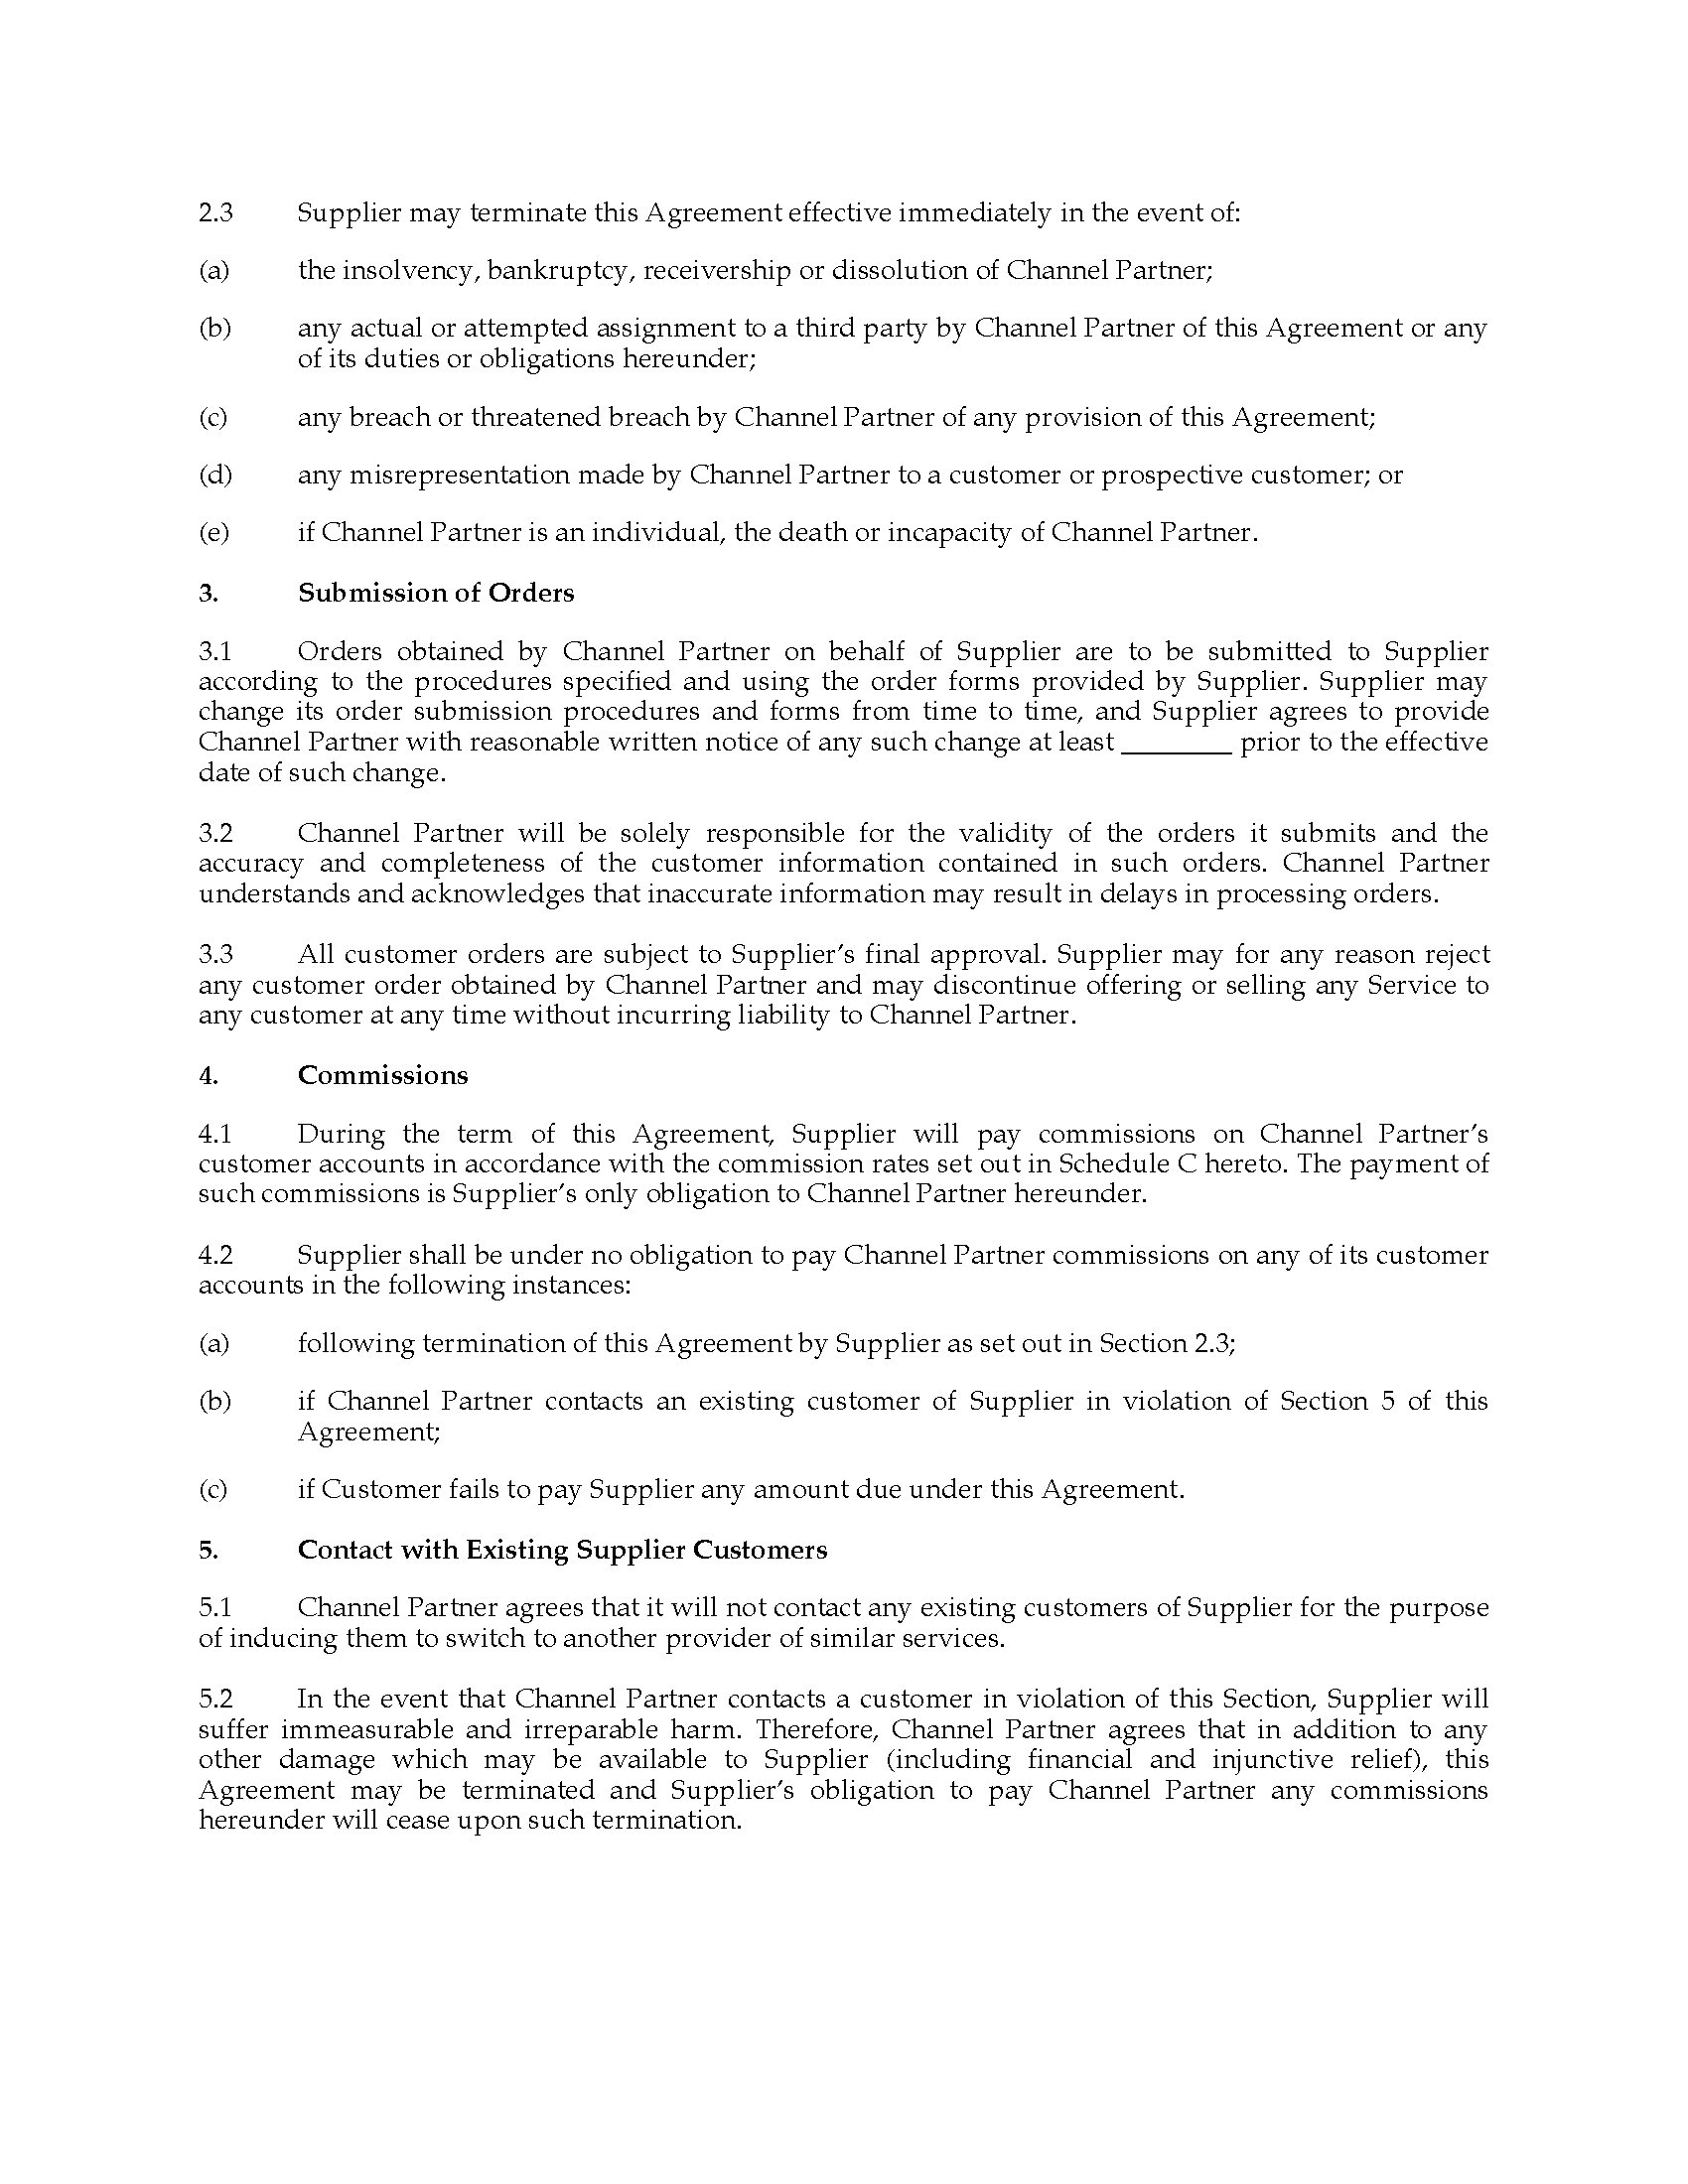 Channel Partner Agreement Template